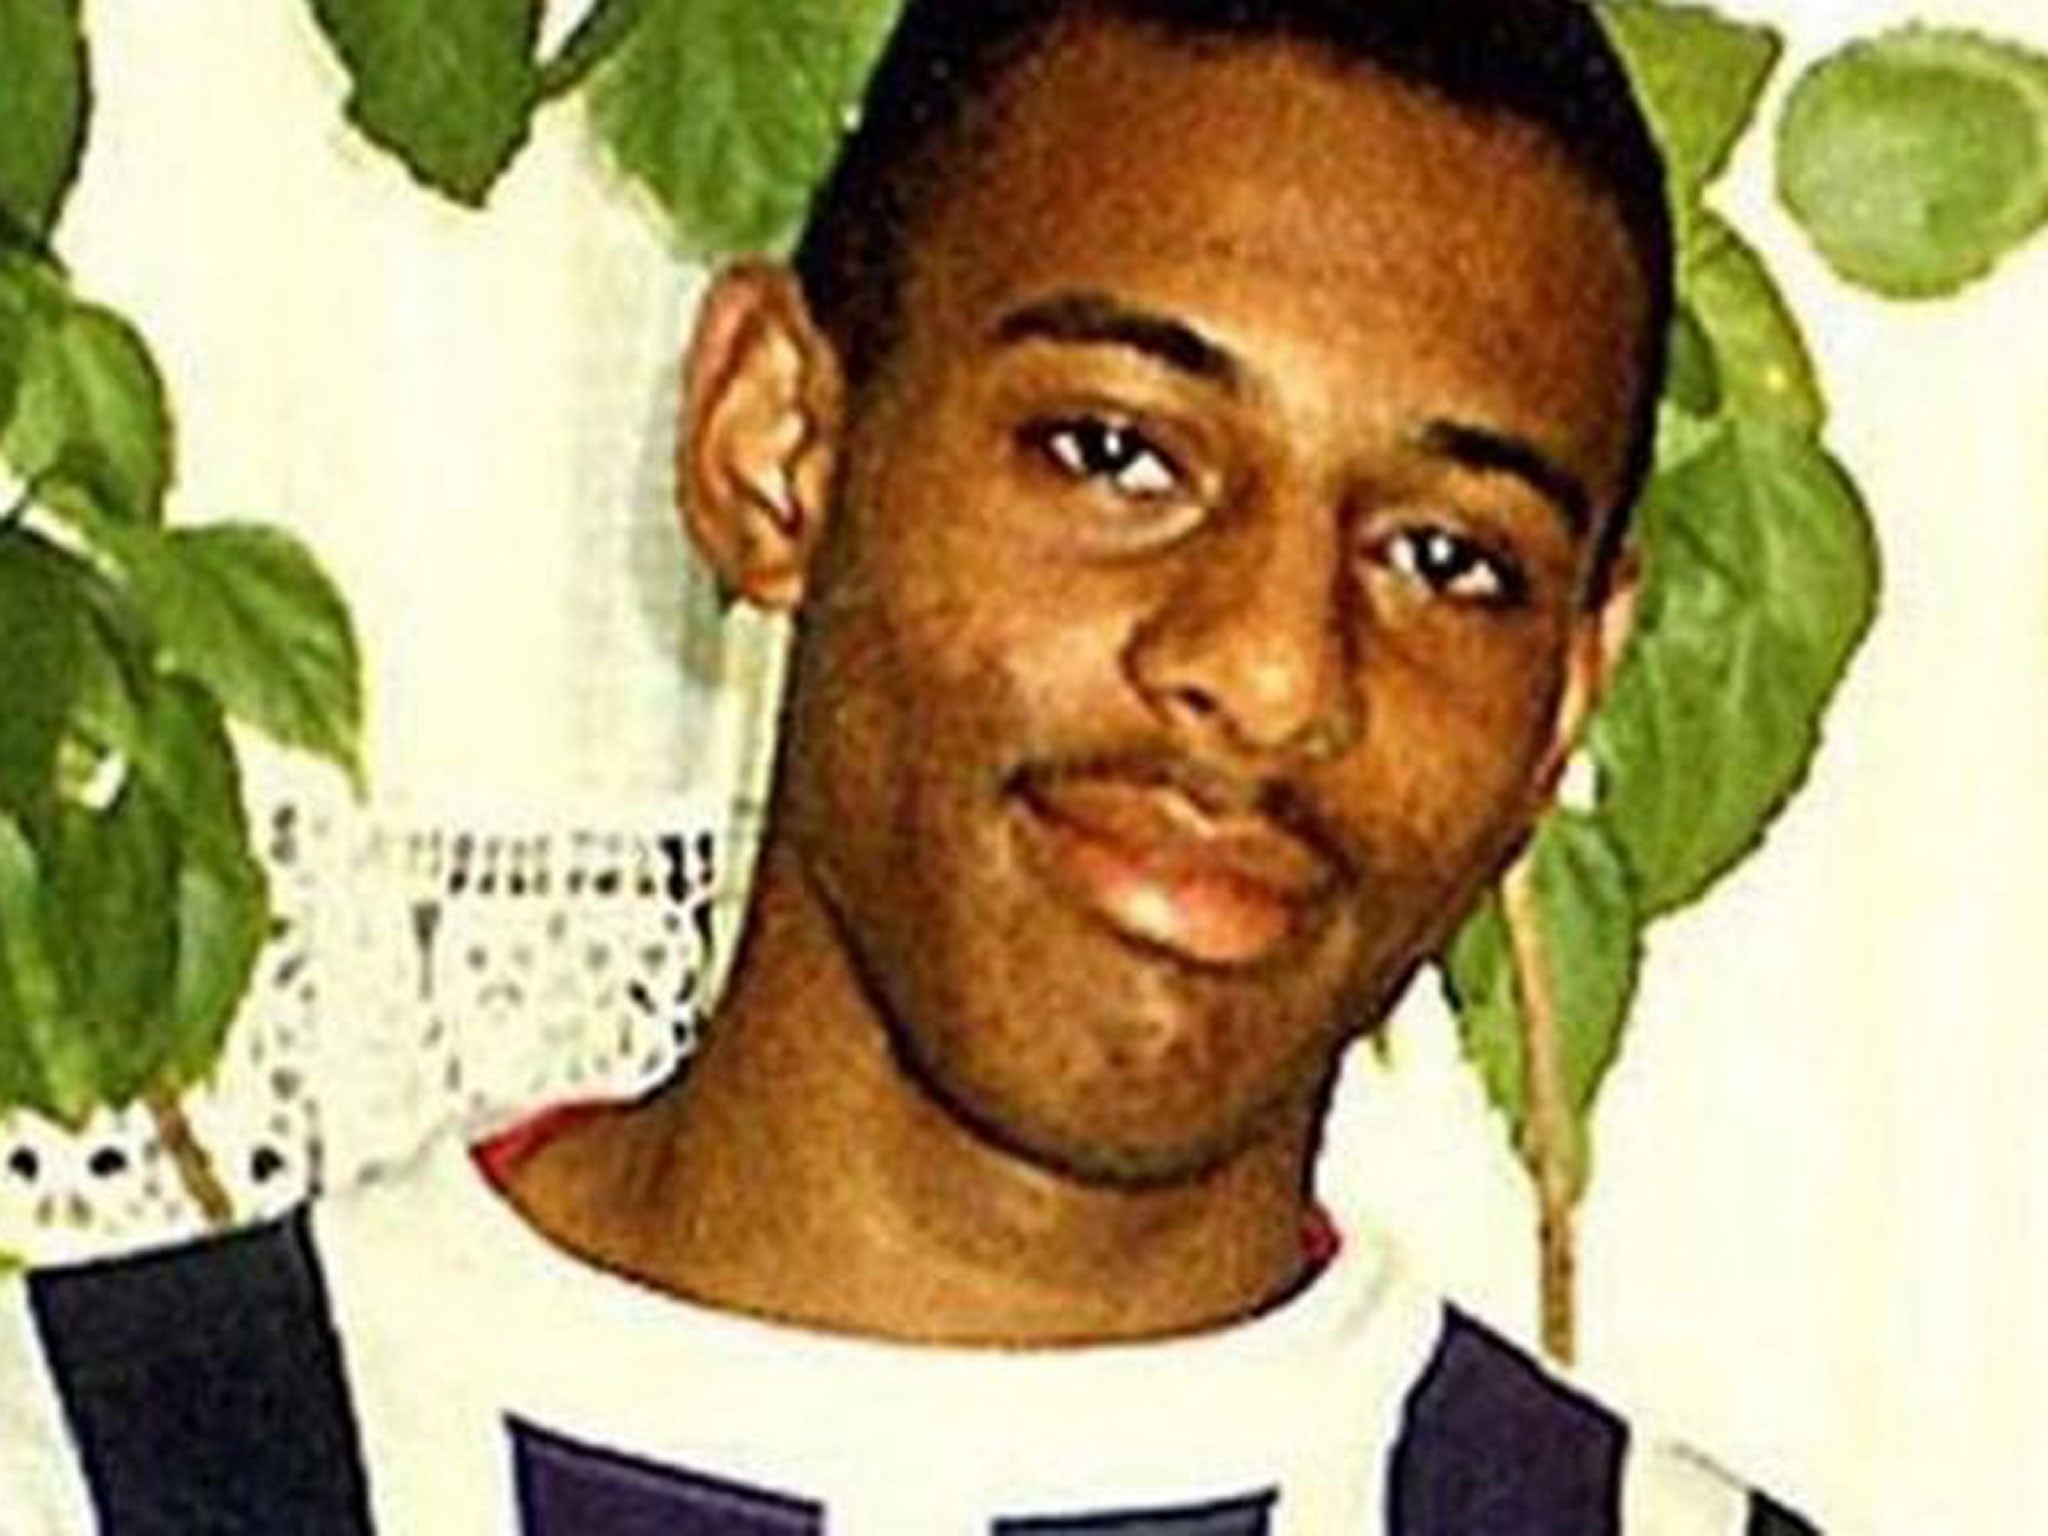 April 22, 2013 marks the 20th anniversary of the murder of black teenager Stephen Lawrence